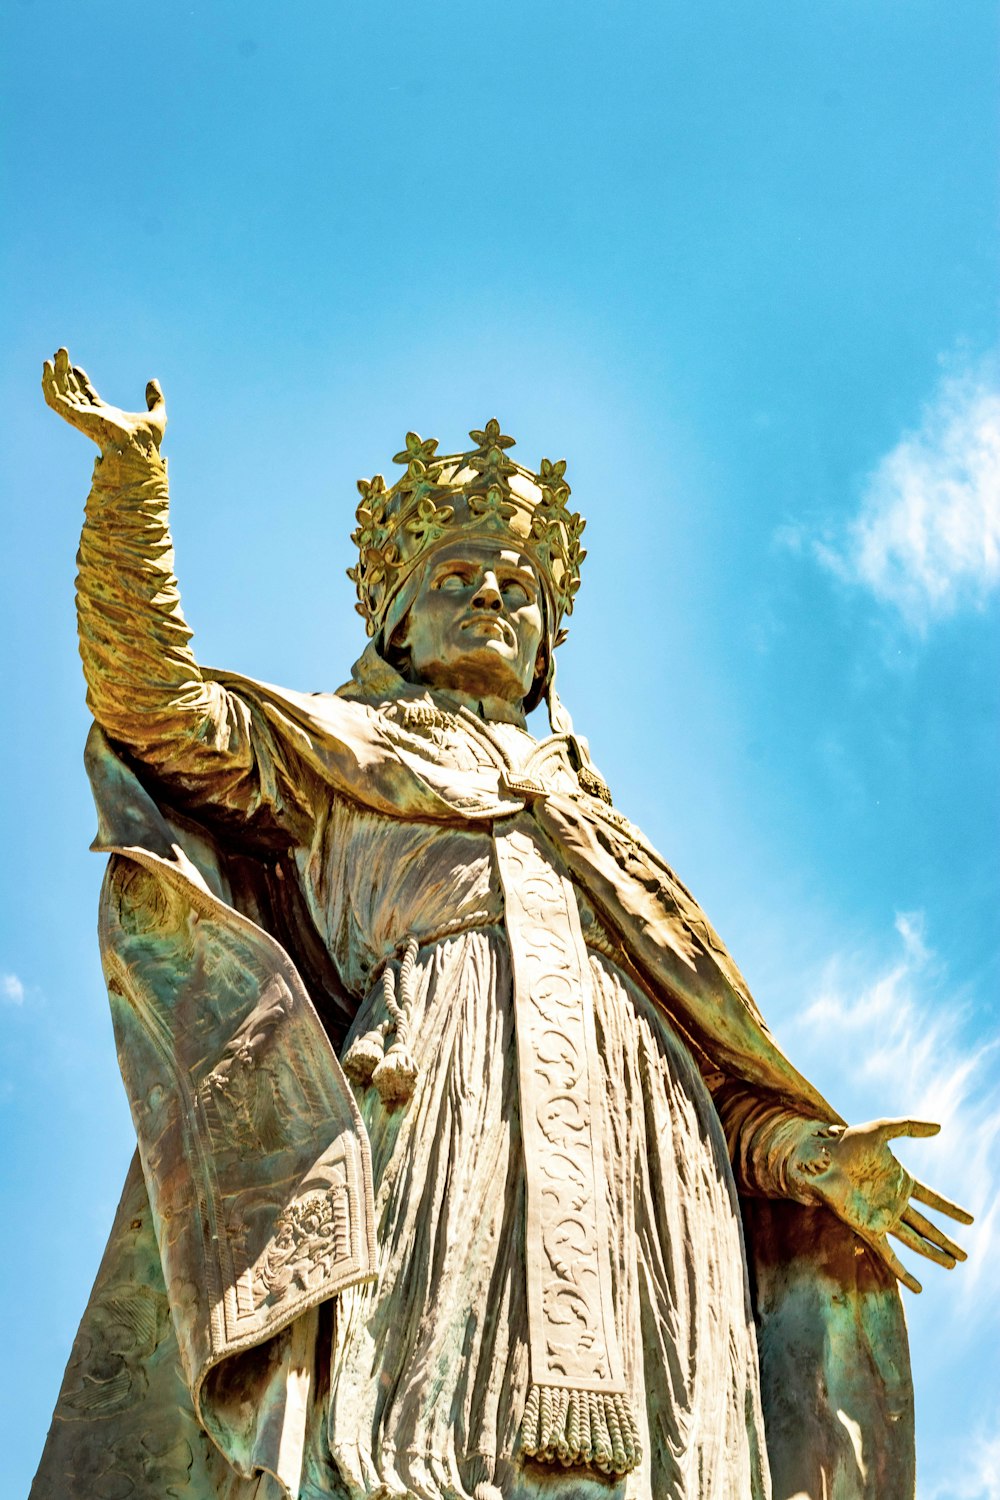 close-up photography of man wearing cape and crown statue during daytime